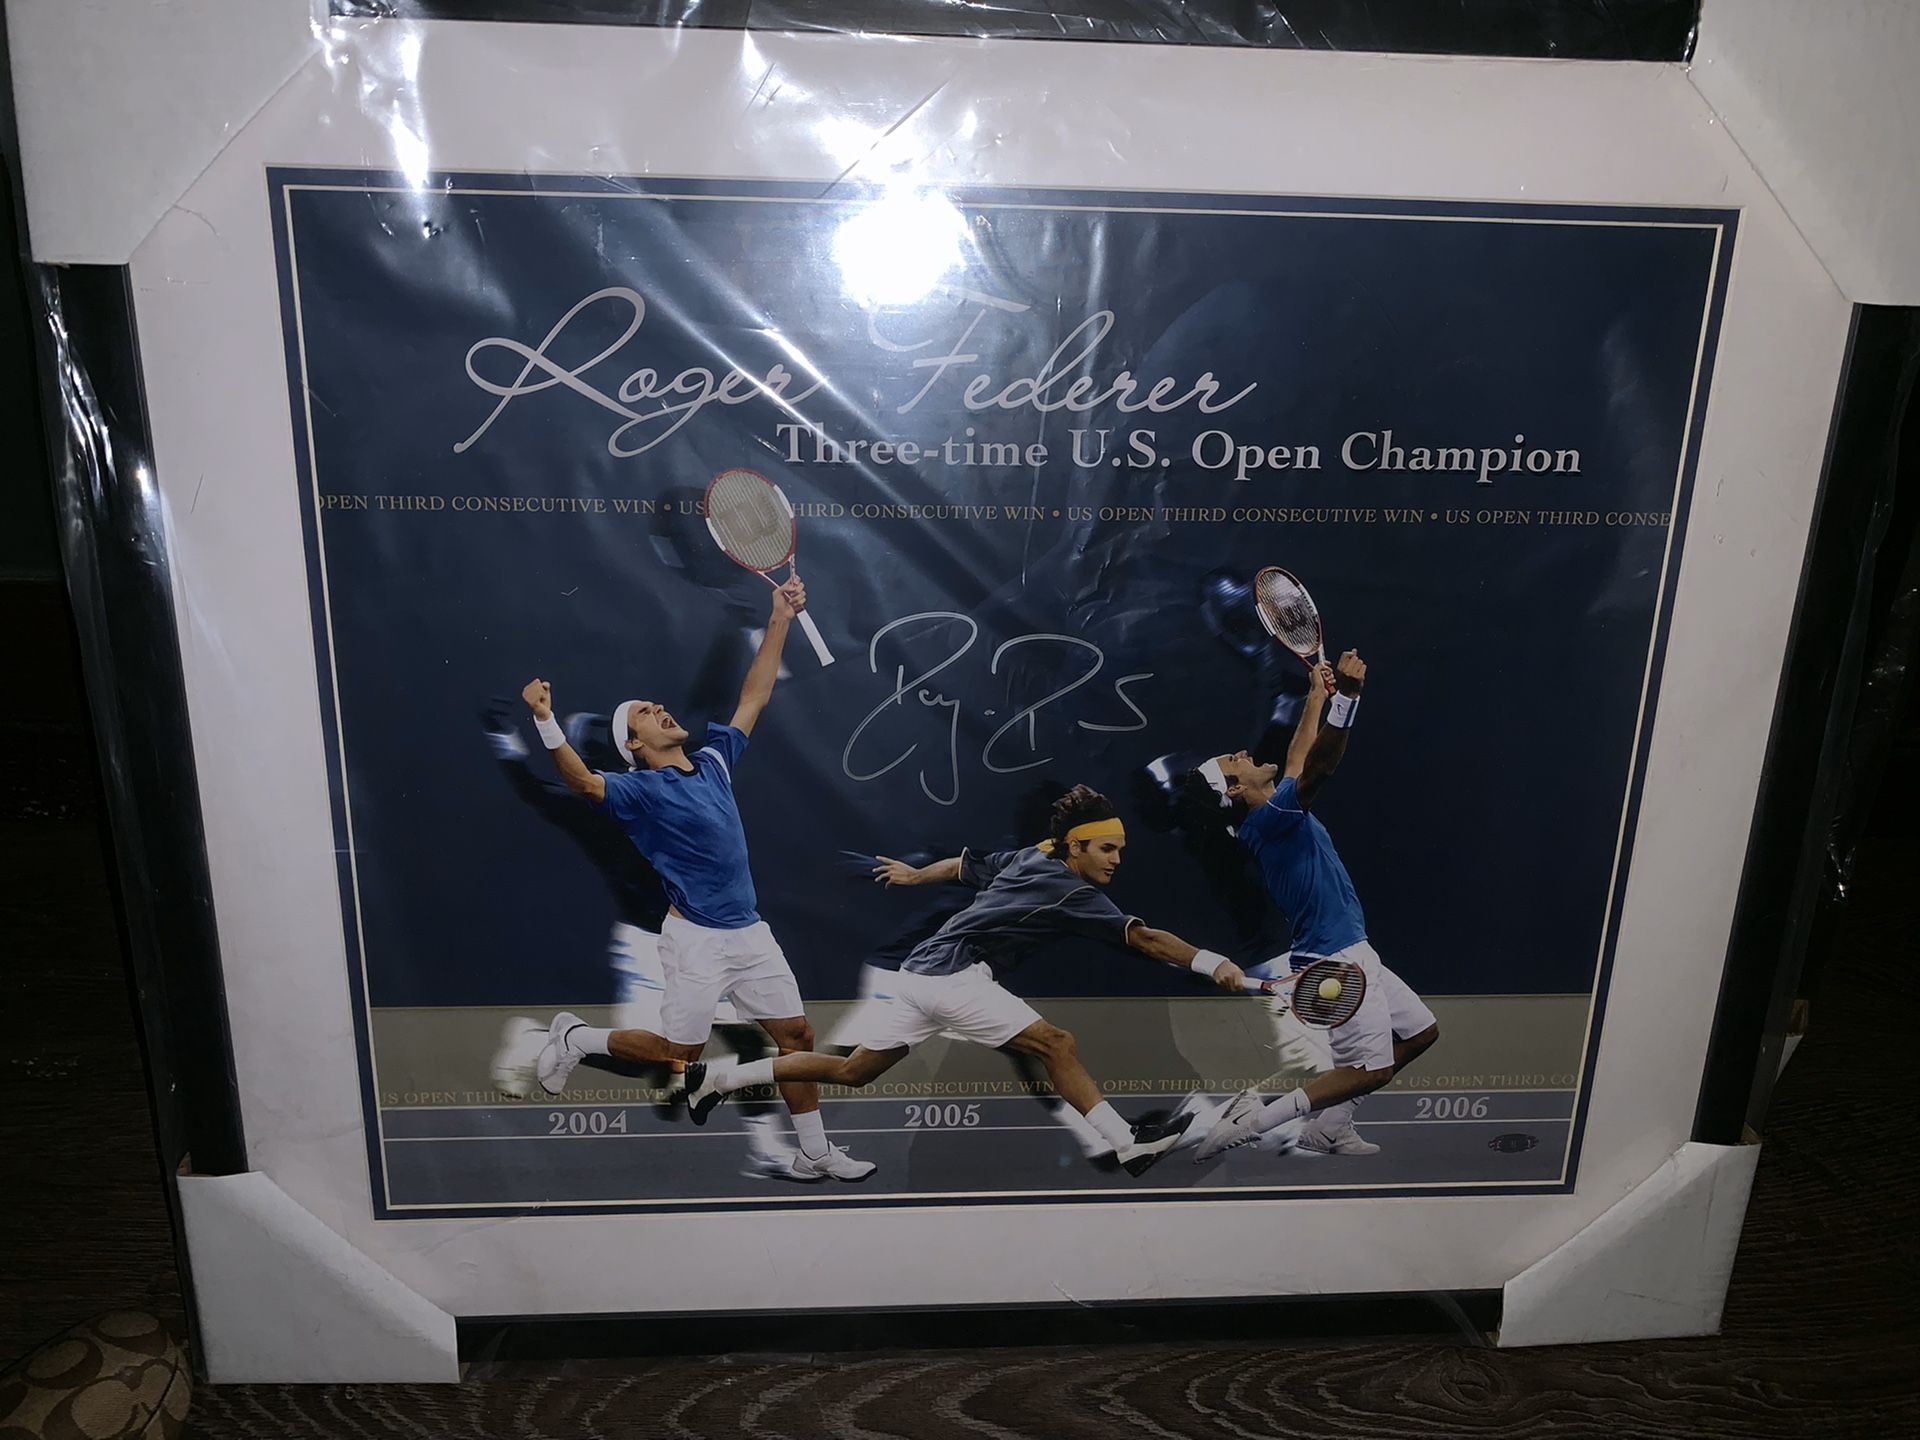 Roger Federer 3x US Open Championship Autographed Collage with authenticity